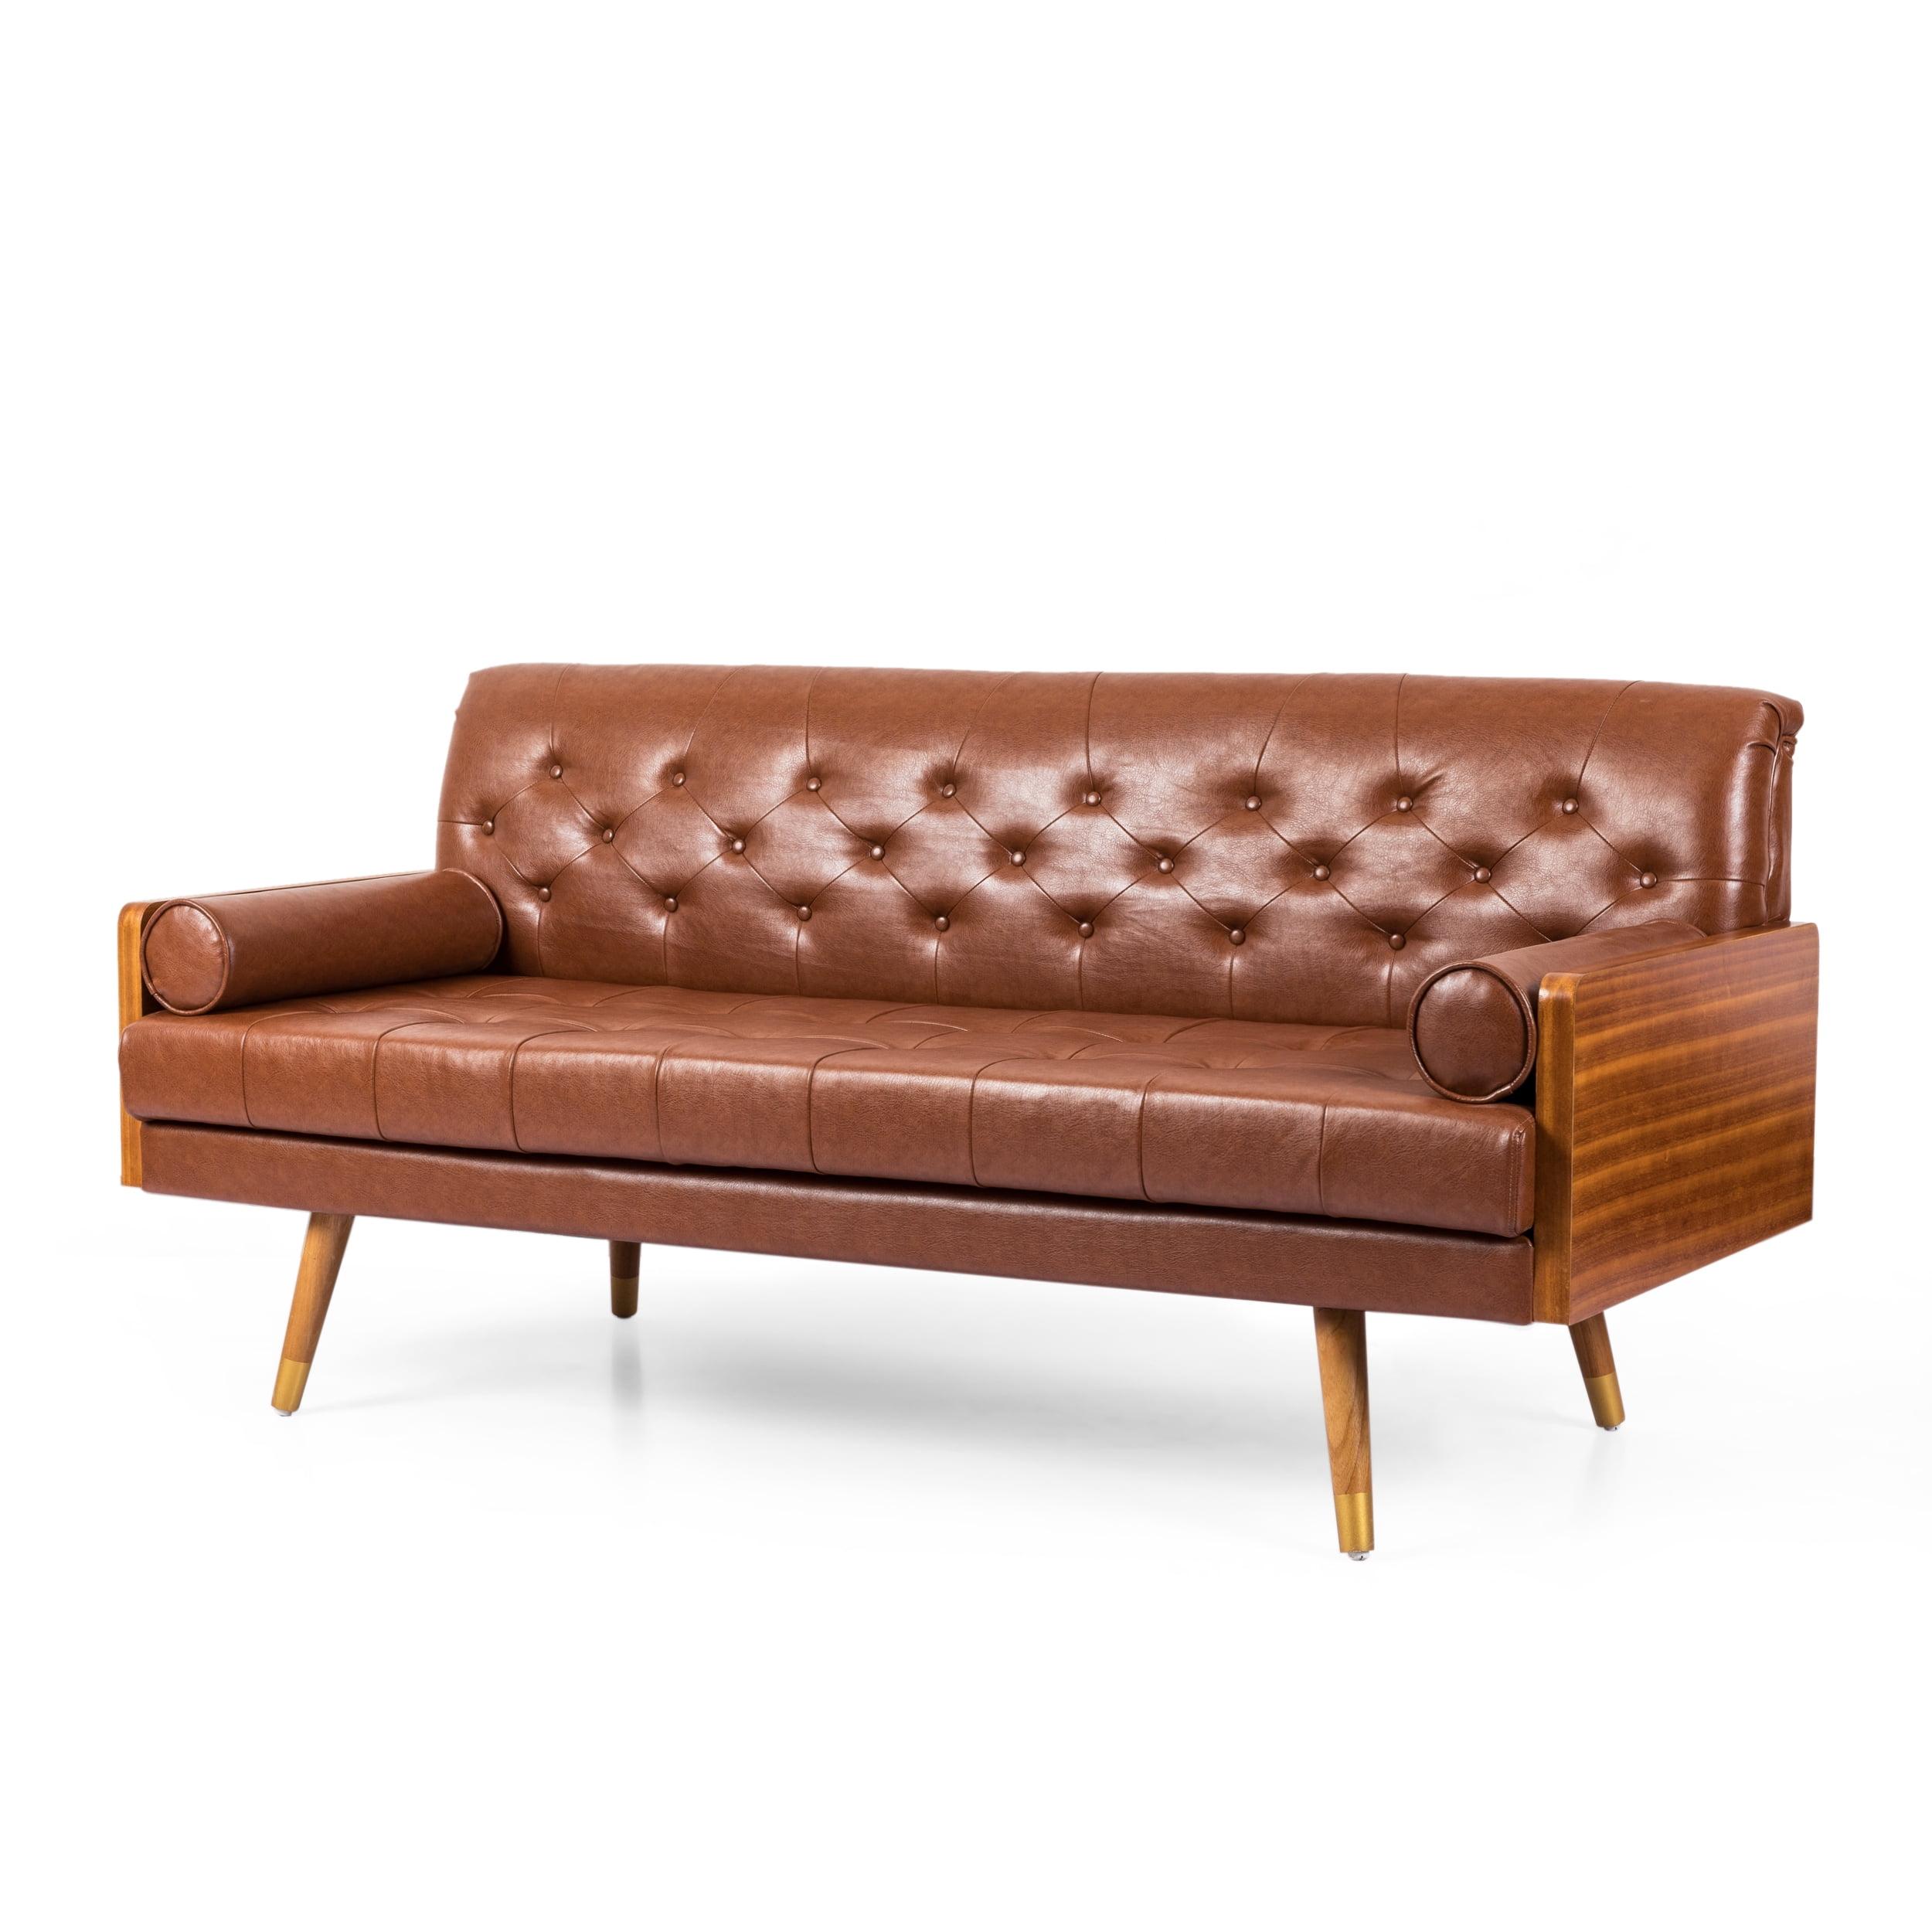 Cognac Brown Faux Leather Tufted Mid-Century Sofa with Gold-Tipped Legs